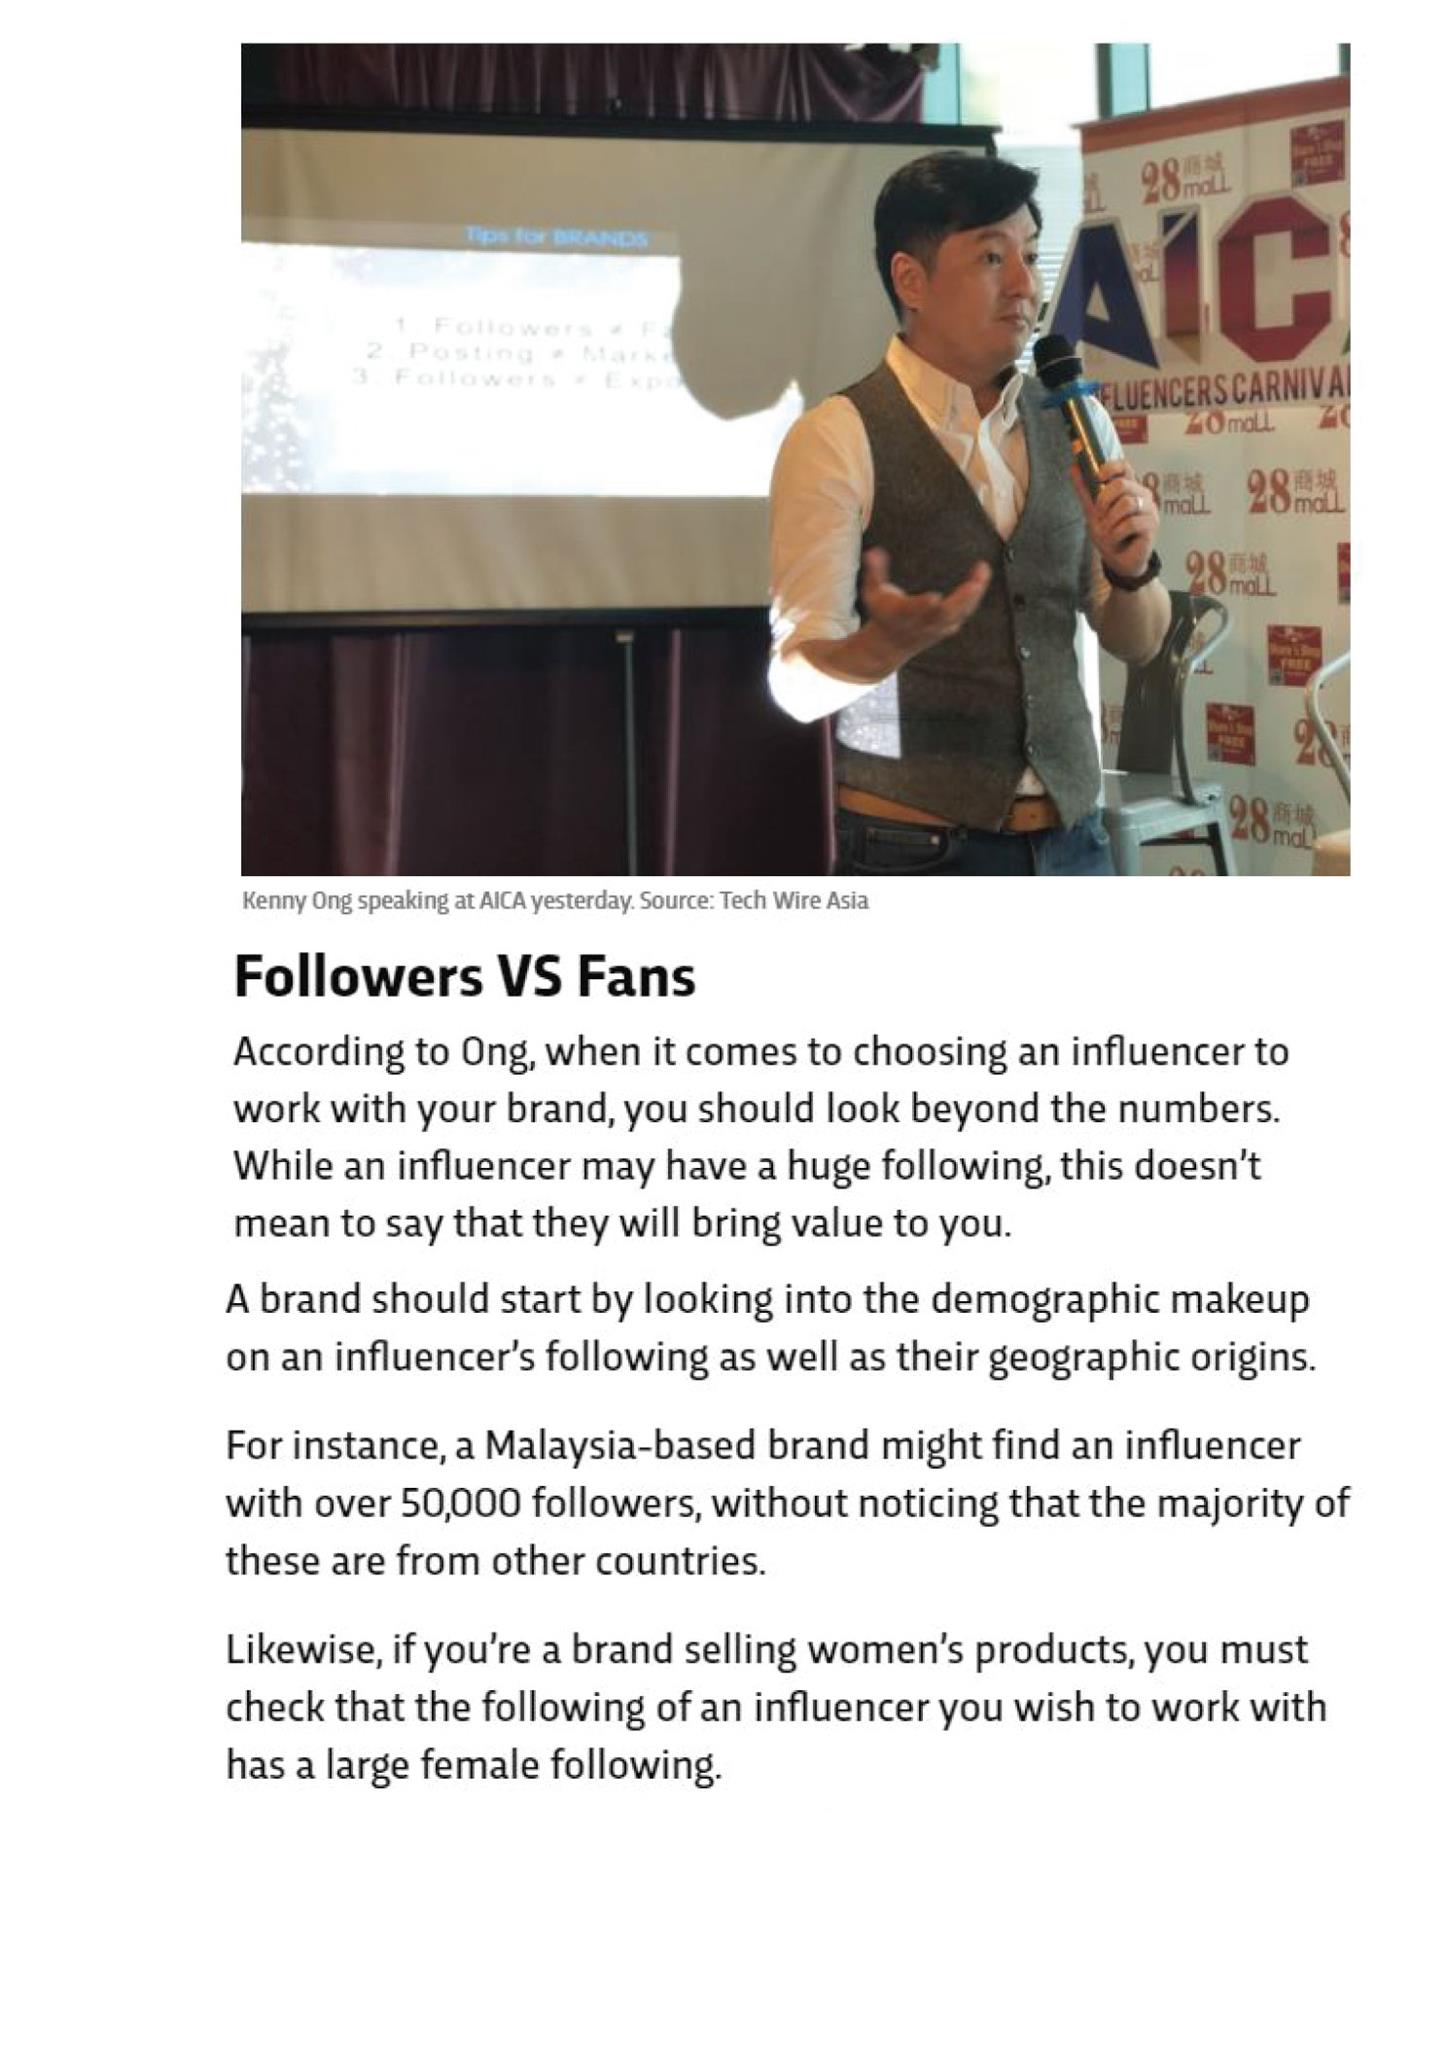 What should brand consider when working with influencers by TechWire Asia